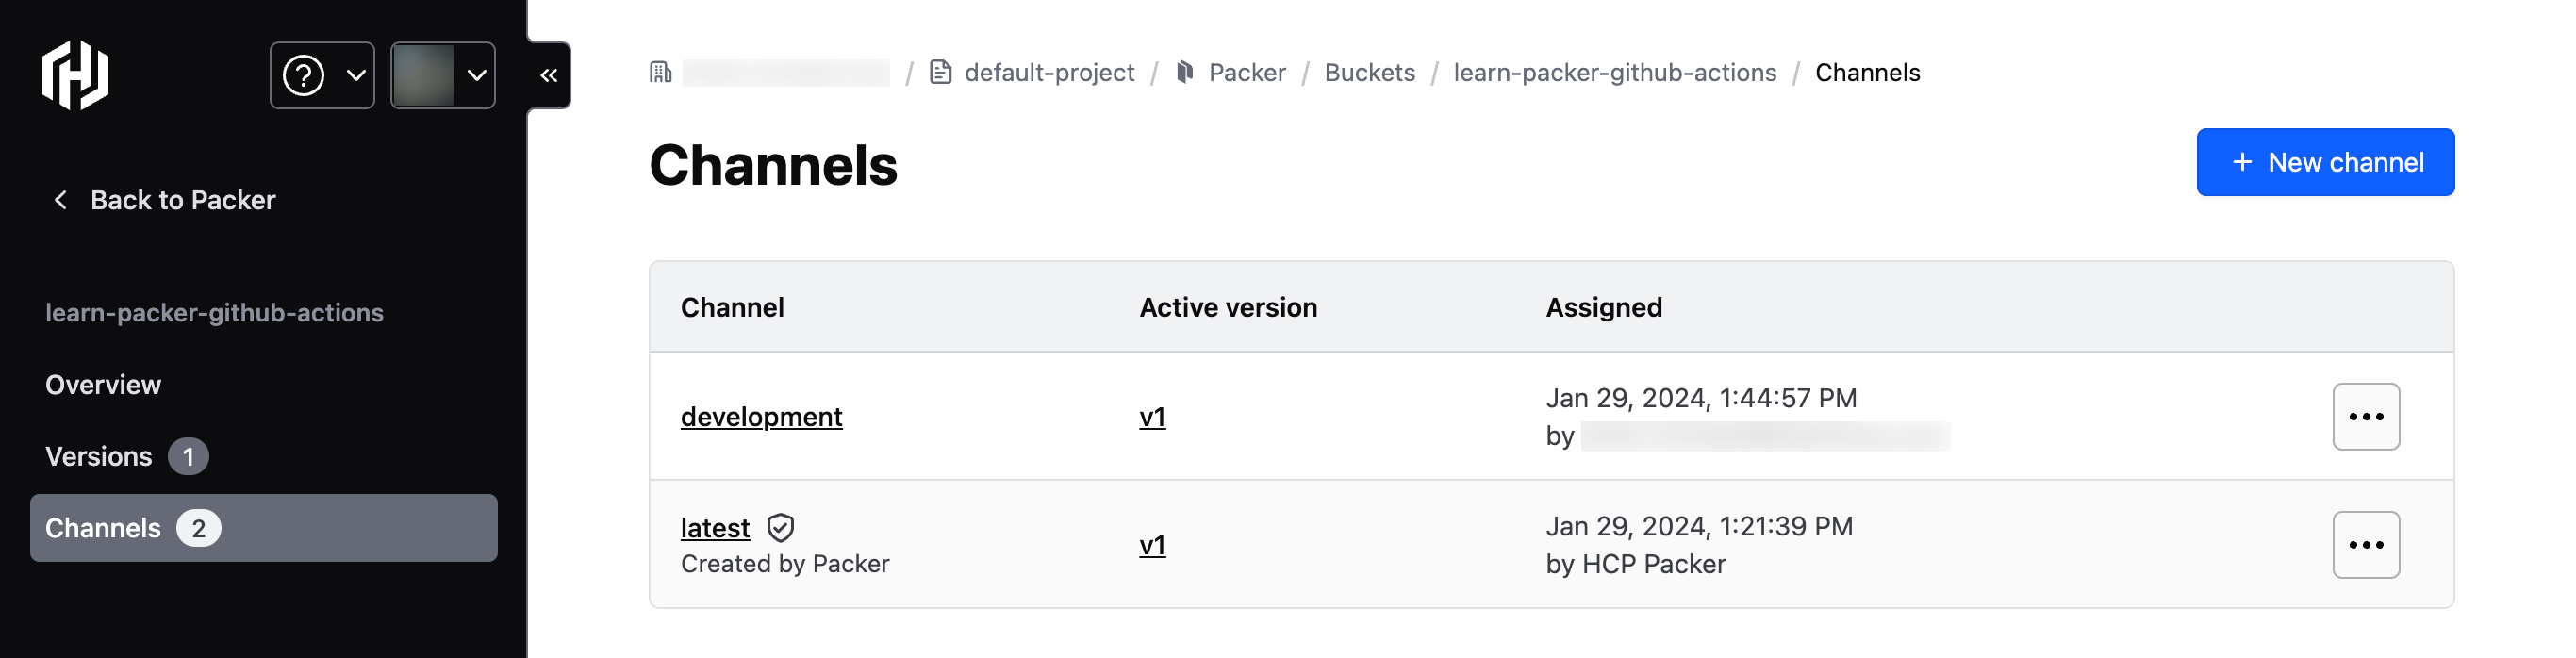 View newly created development channel in the learn-packer-github-actions bucket